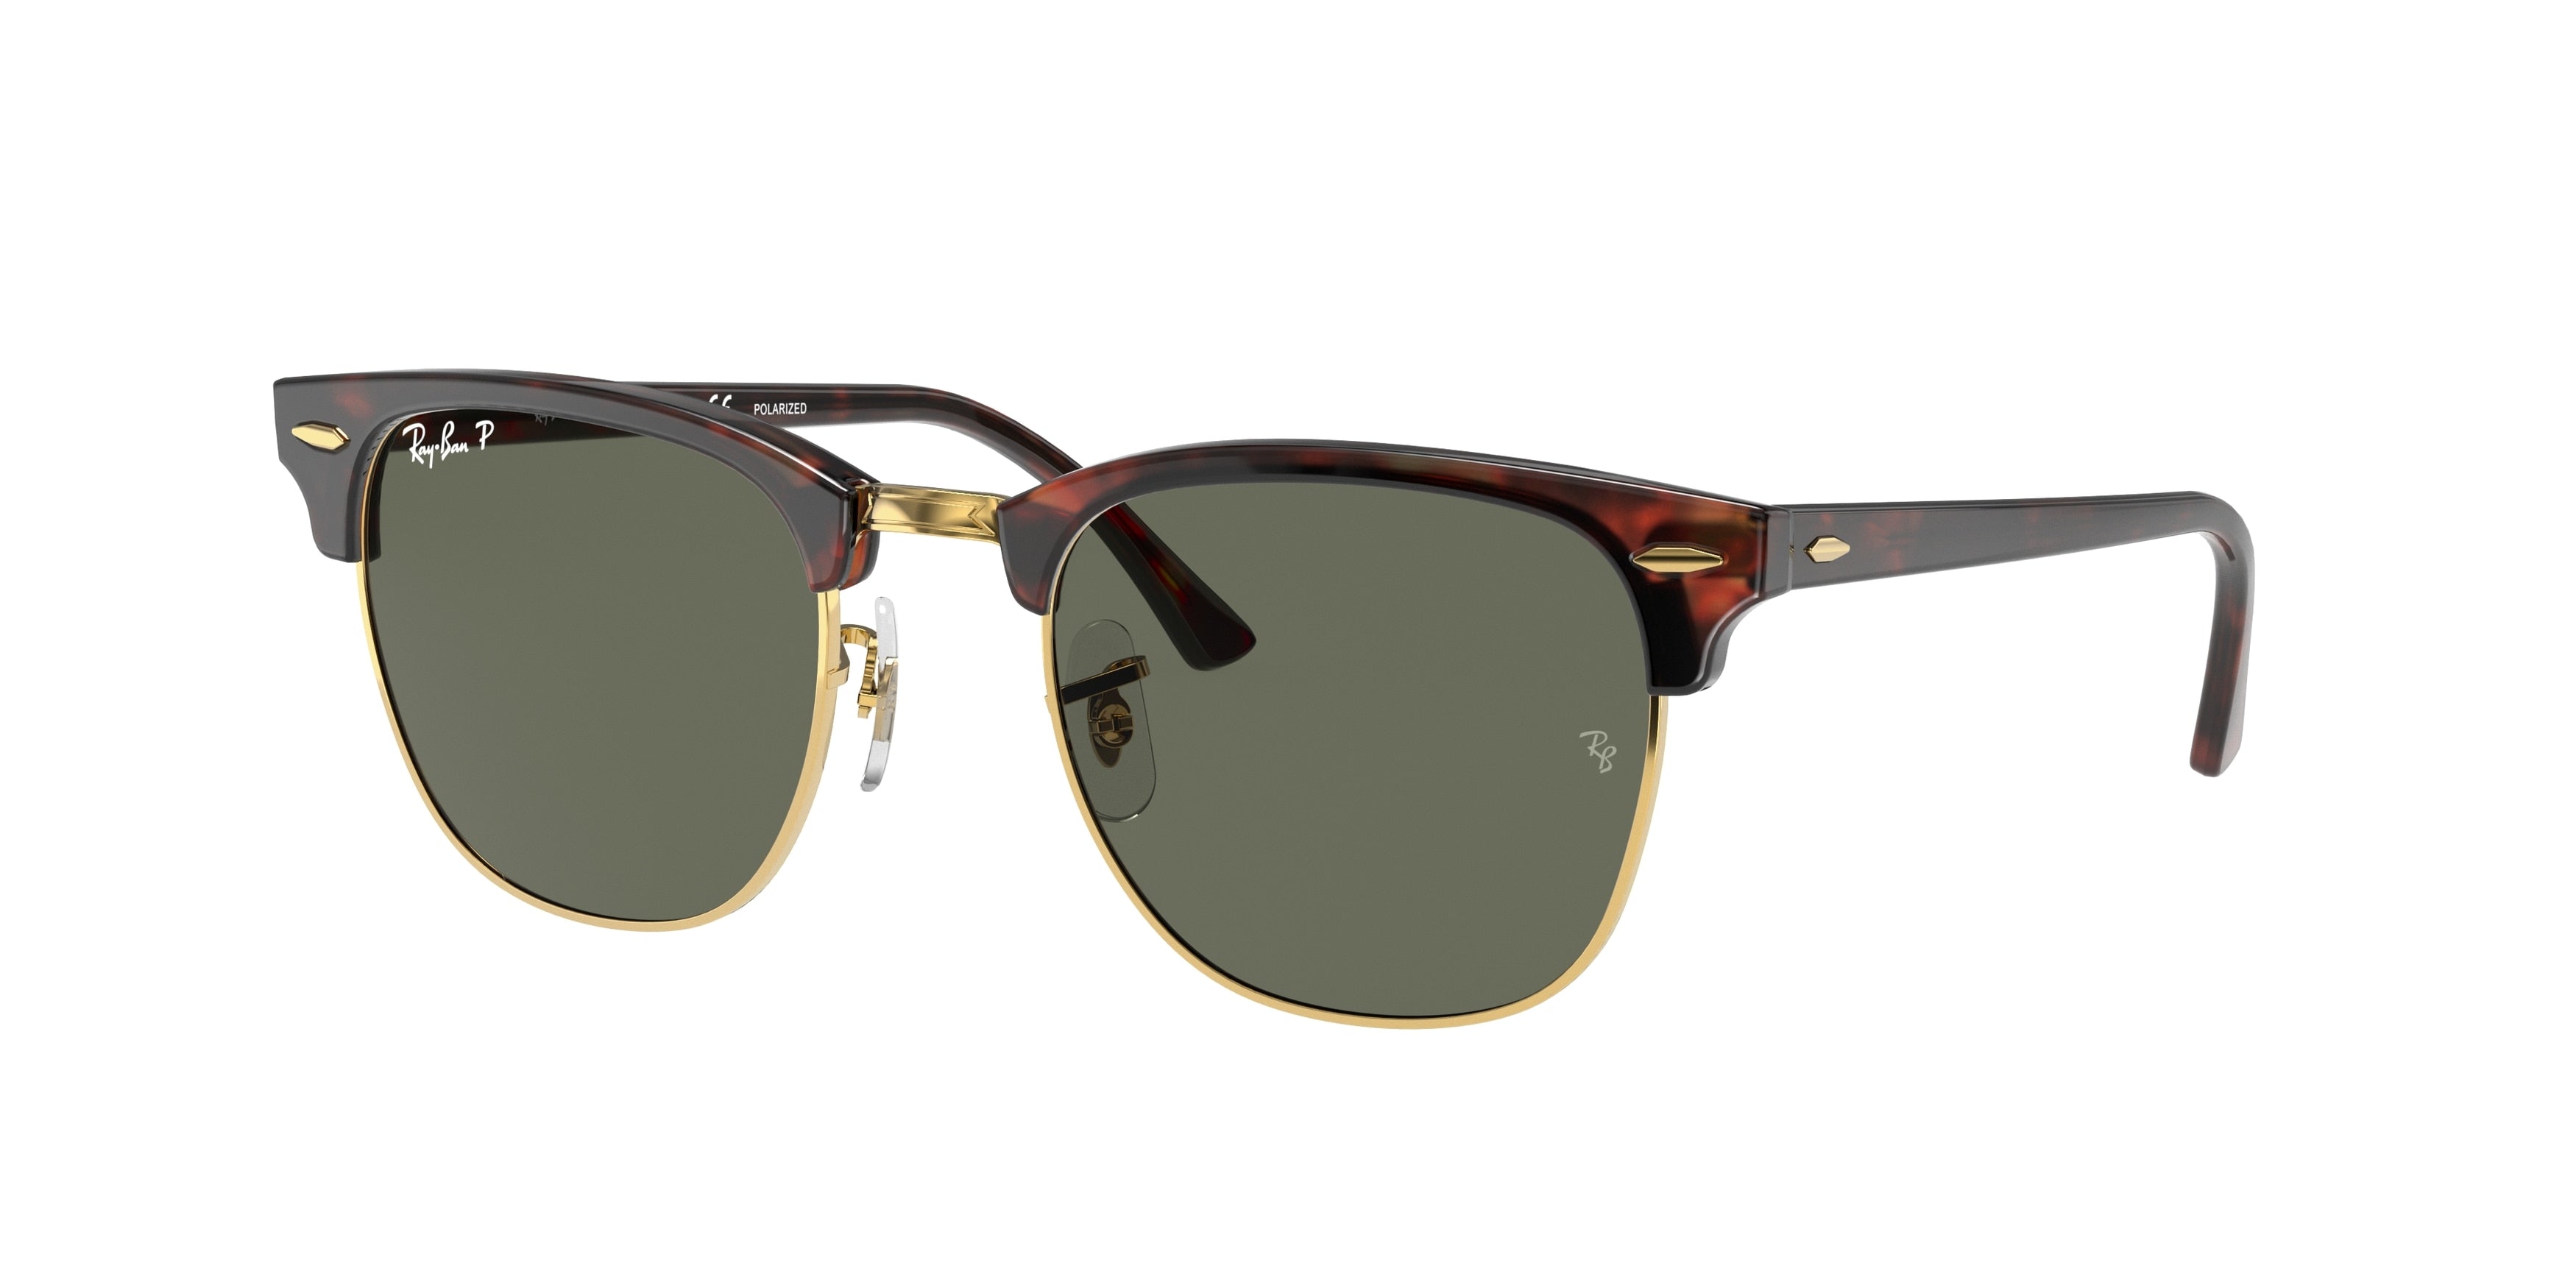 Ray-Ban CLUBMASTER RB3016 Square Sunglasses  990/58-Red Havana 55-150-21 - Color Map Red